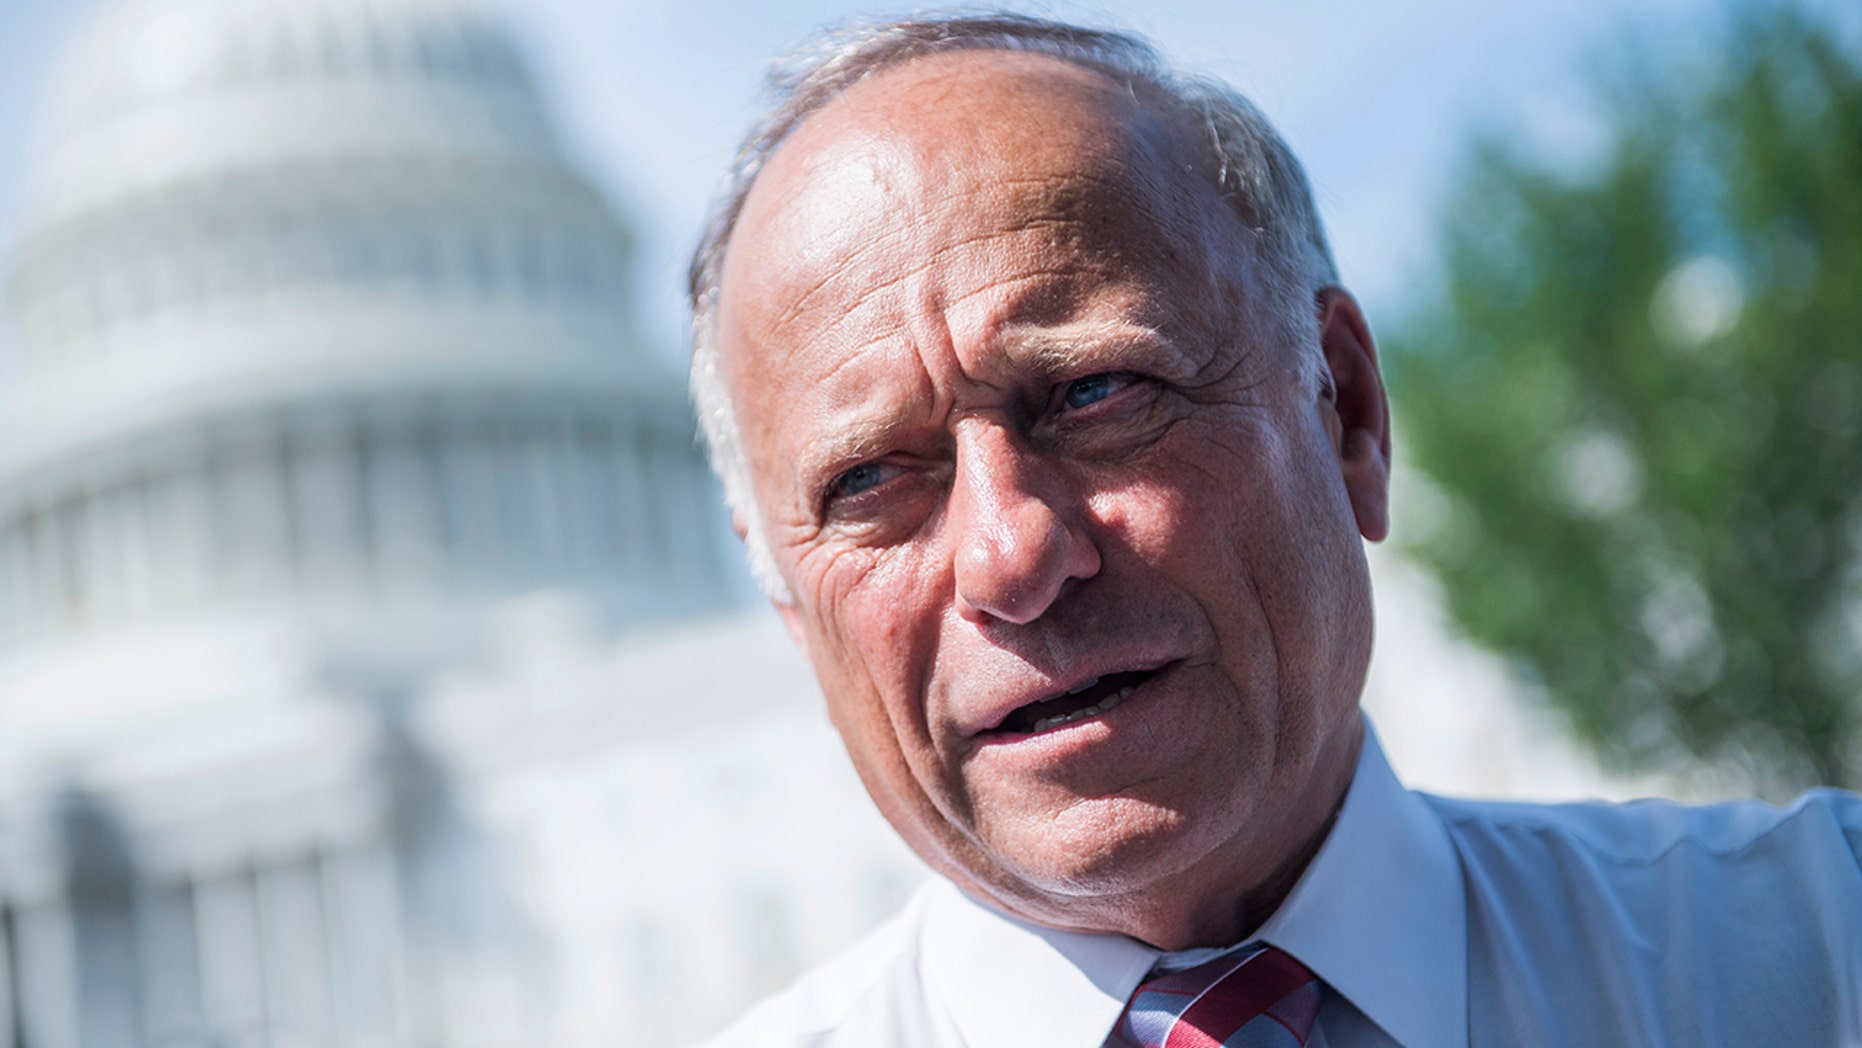 Rep. Steve King slammed by fellow GOP colleagues for 